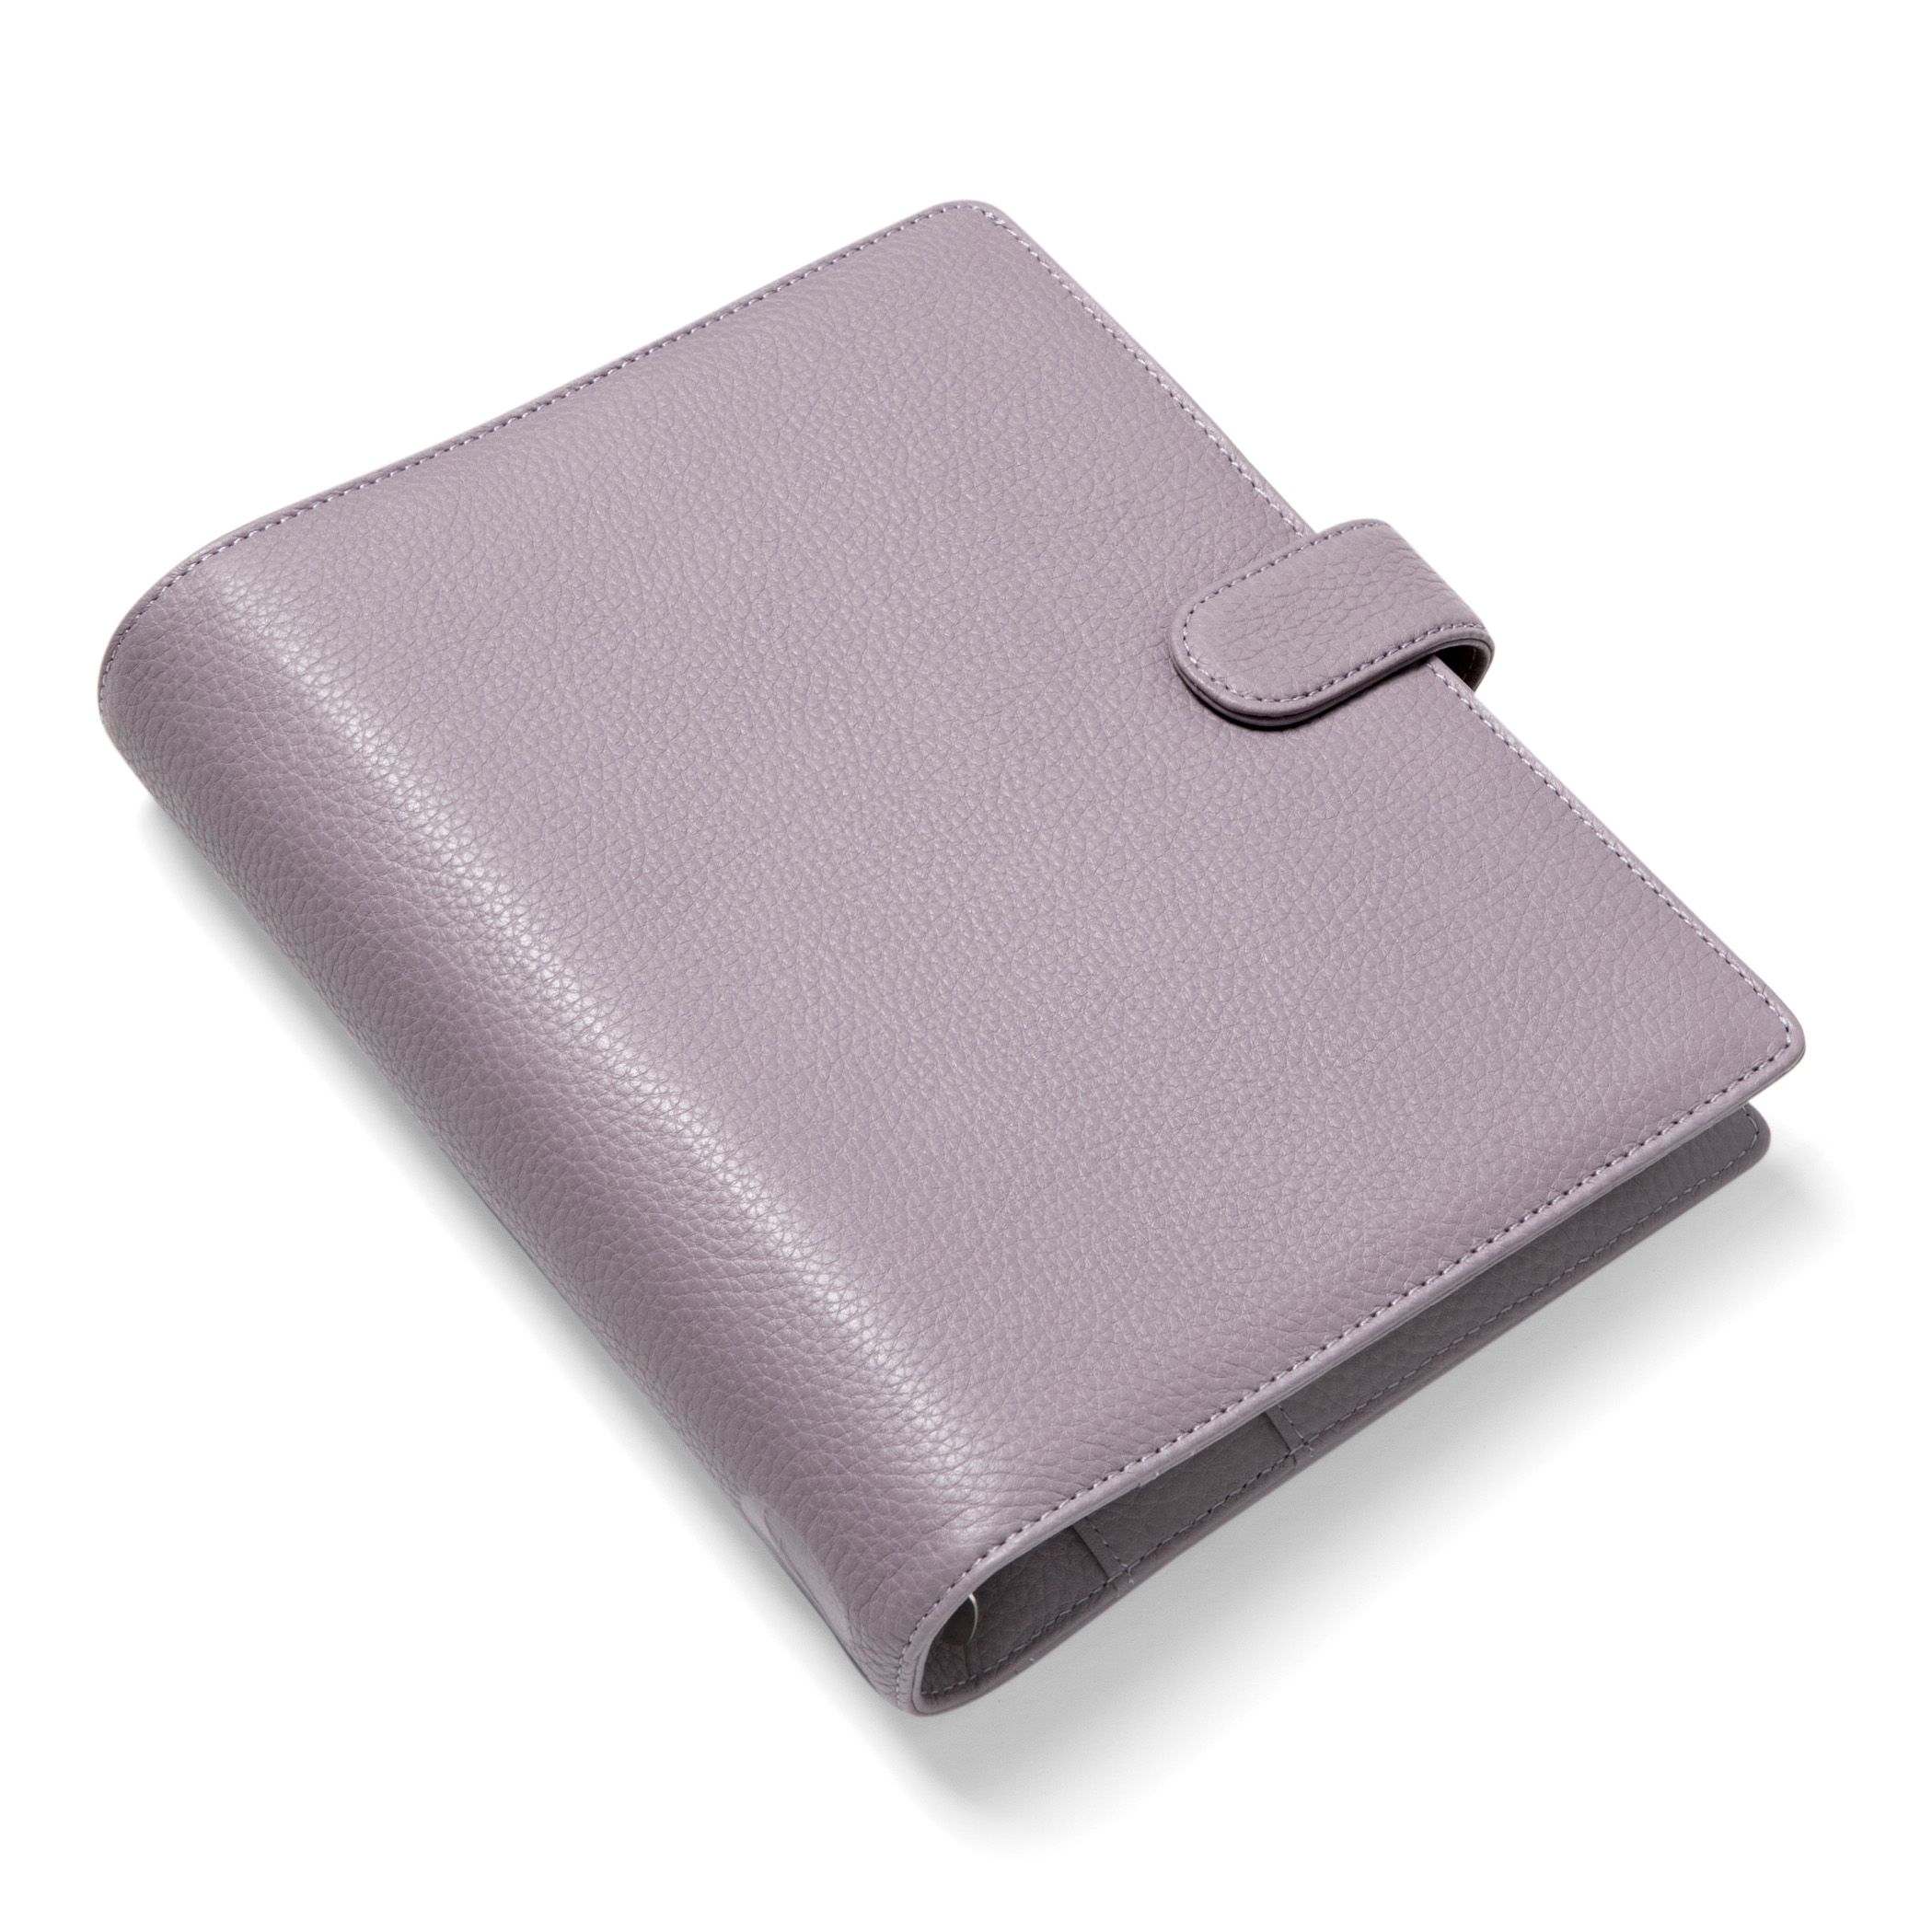 Filofax Norfolk A5 Lavender  Penworld » More than 10.000 pens in stock,  fast delivery